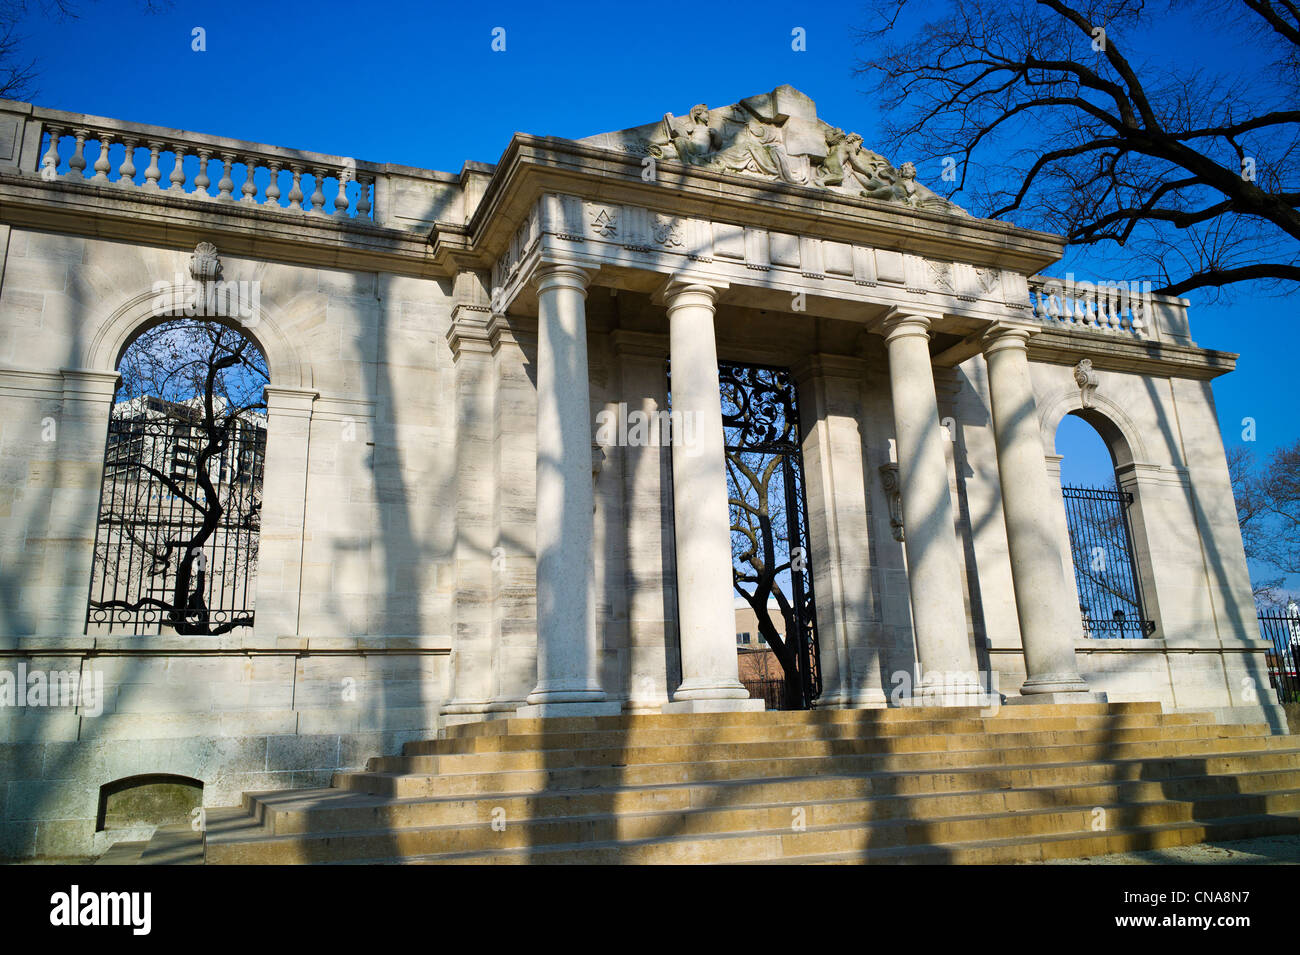 The Rodin Museum features the work of famous sculpture August Rodin, built in 1929 by Jules Mastbaum, Philadelphia, Pennsylvania Stock Photo